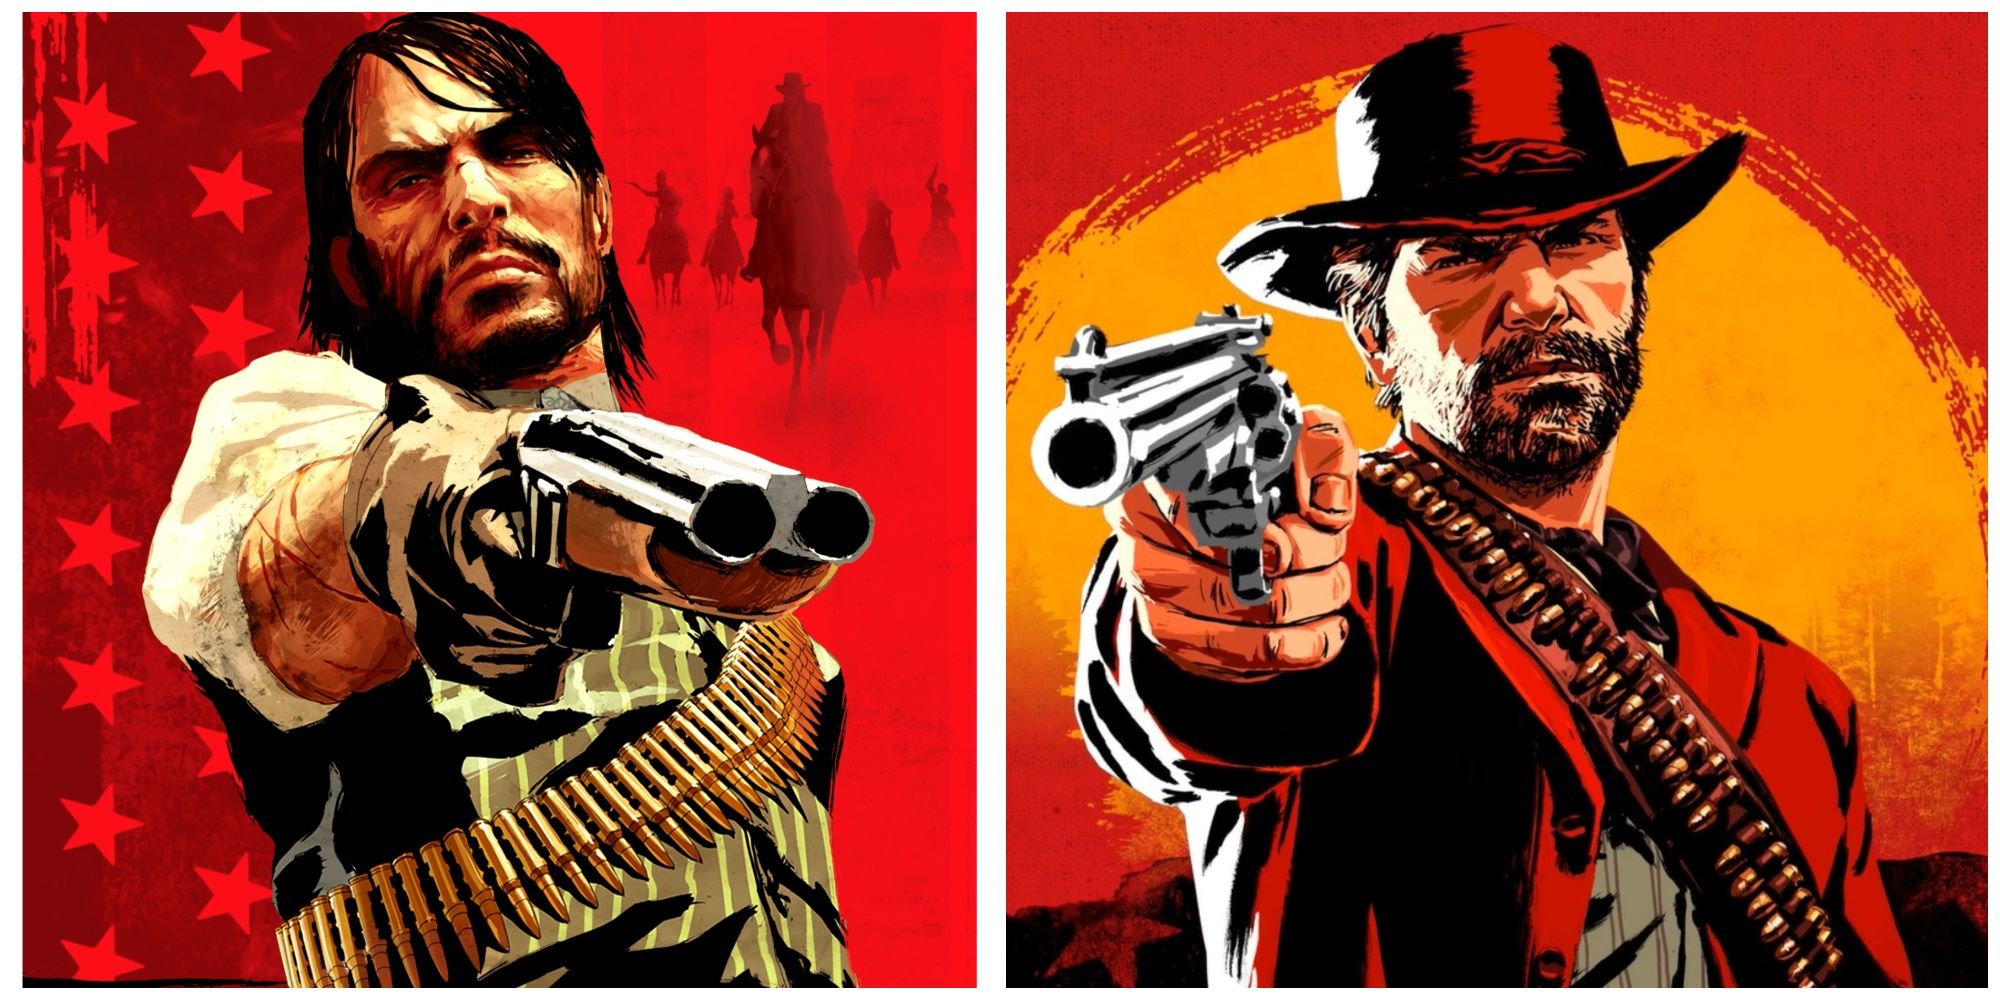 Idea for a Red Dead Redemption 3 storyline : r/reddead